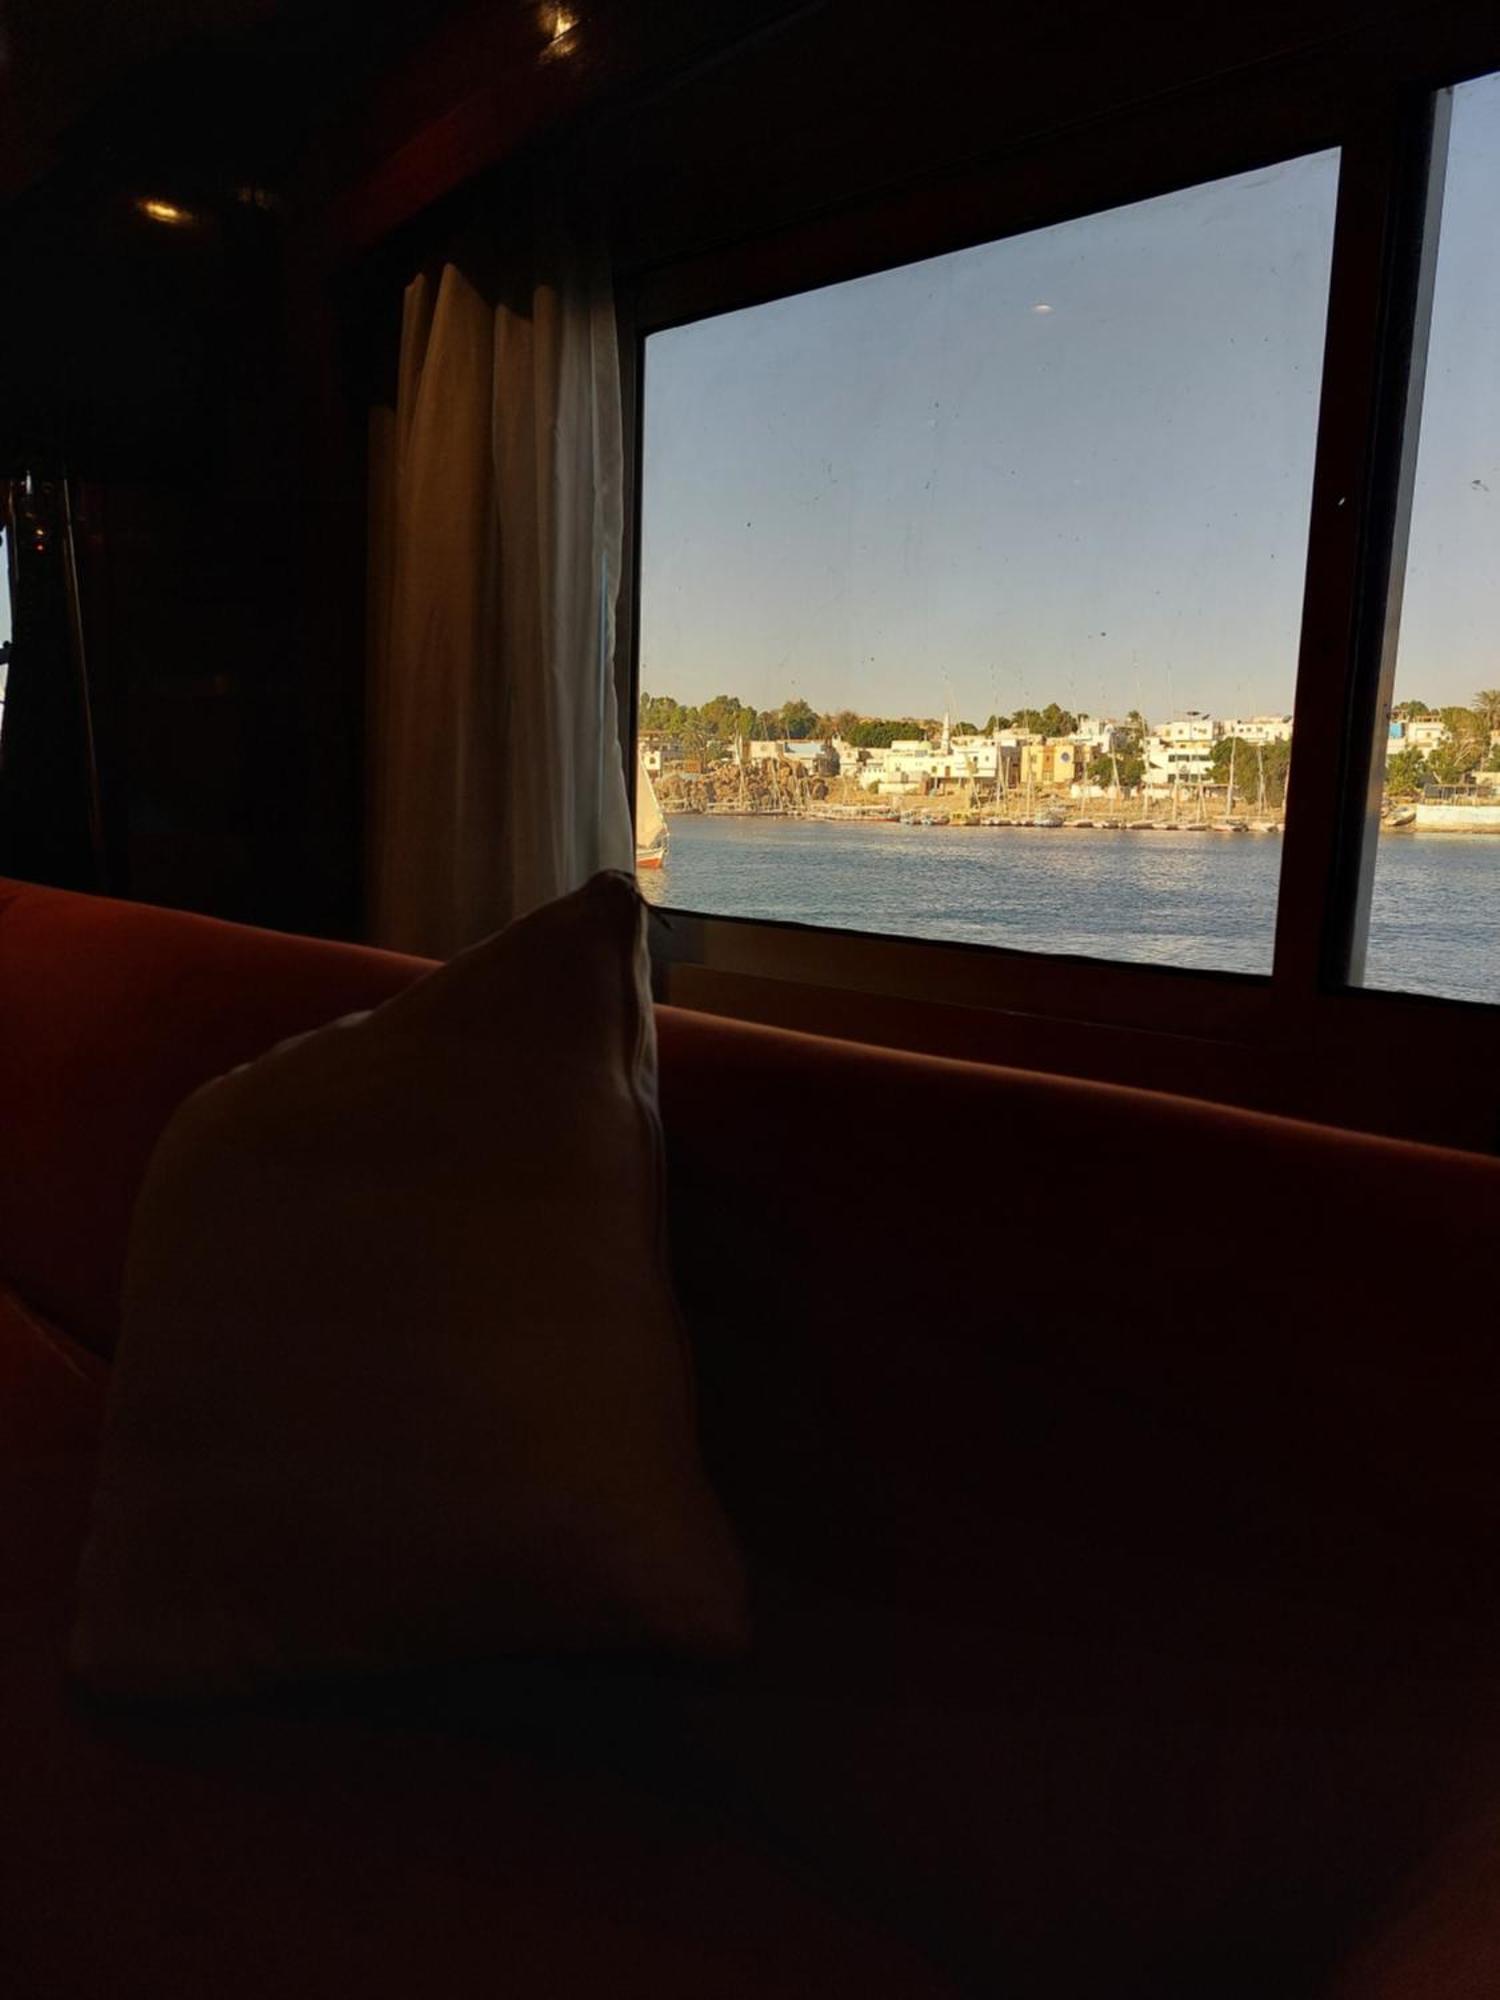 Upper Sky Tours 5 Stars Nile Cruises Sailing From Luxor To Aswan Every Saturday & Monday For 4 Nights - From Aswan Every Wednesday And Friday For Only 3 Nights With All Visits 外观 照片